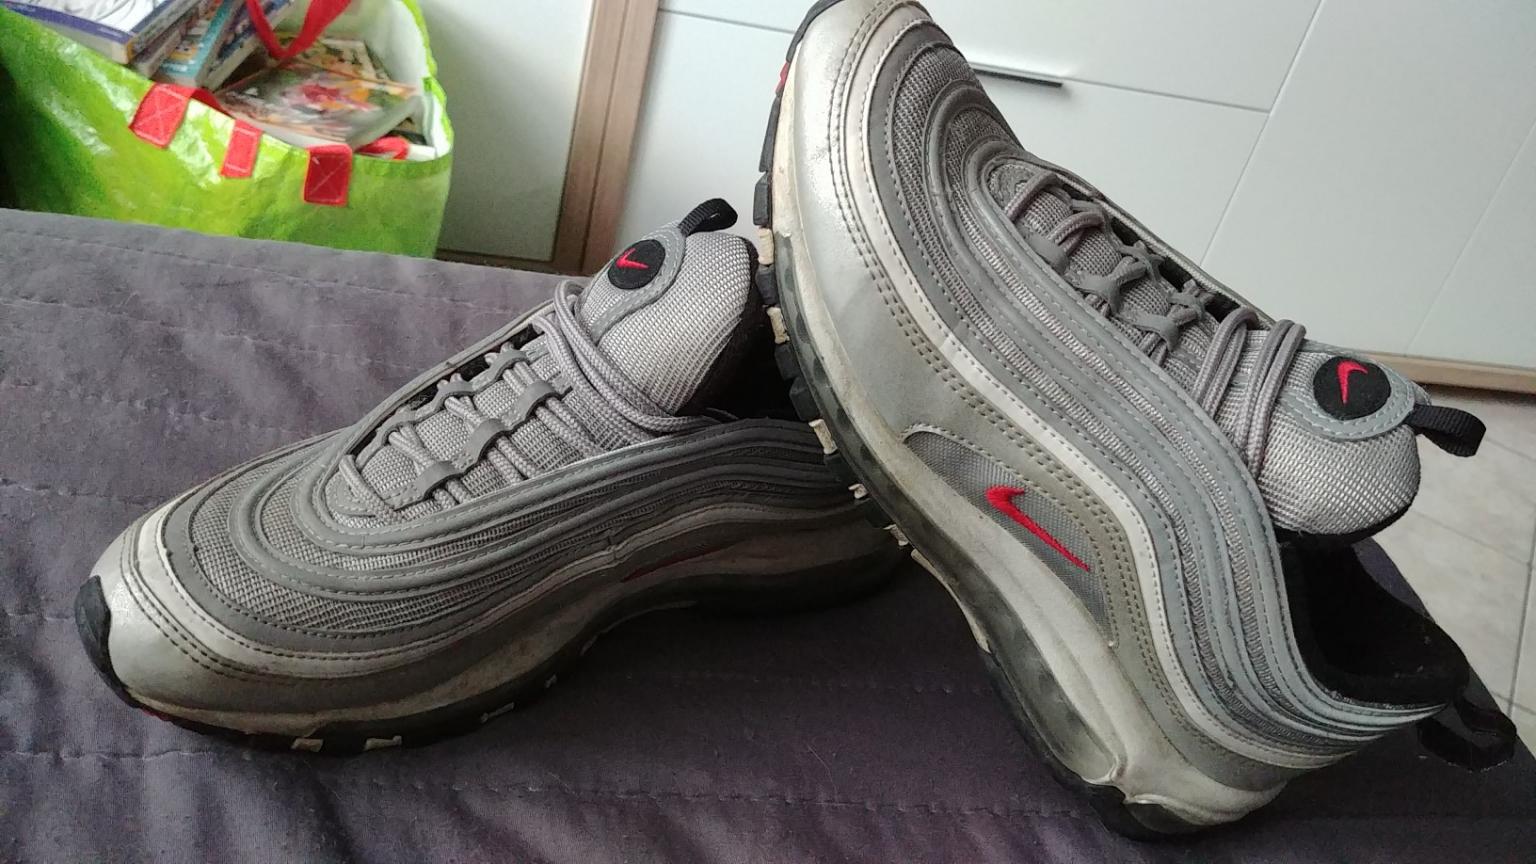 Nike Silver 90 in 10149 Torino for €40.00 for sale | Shpock